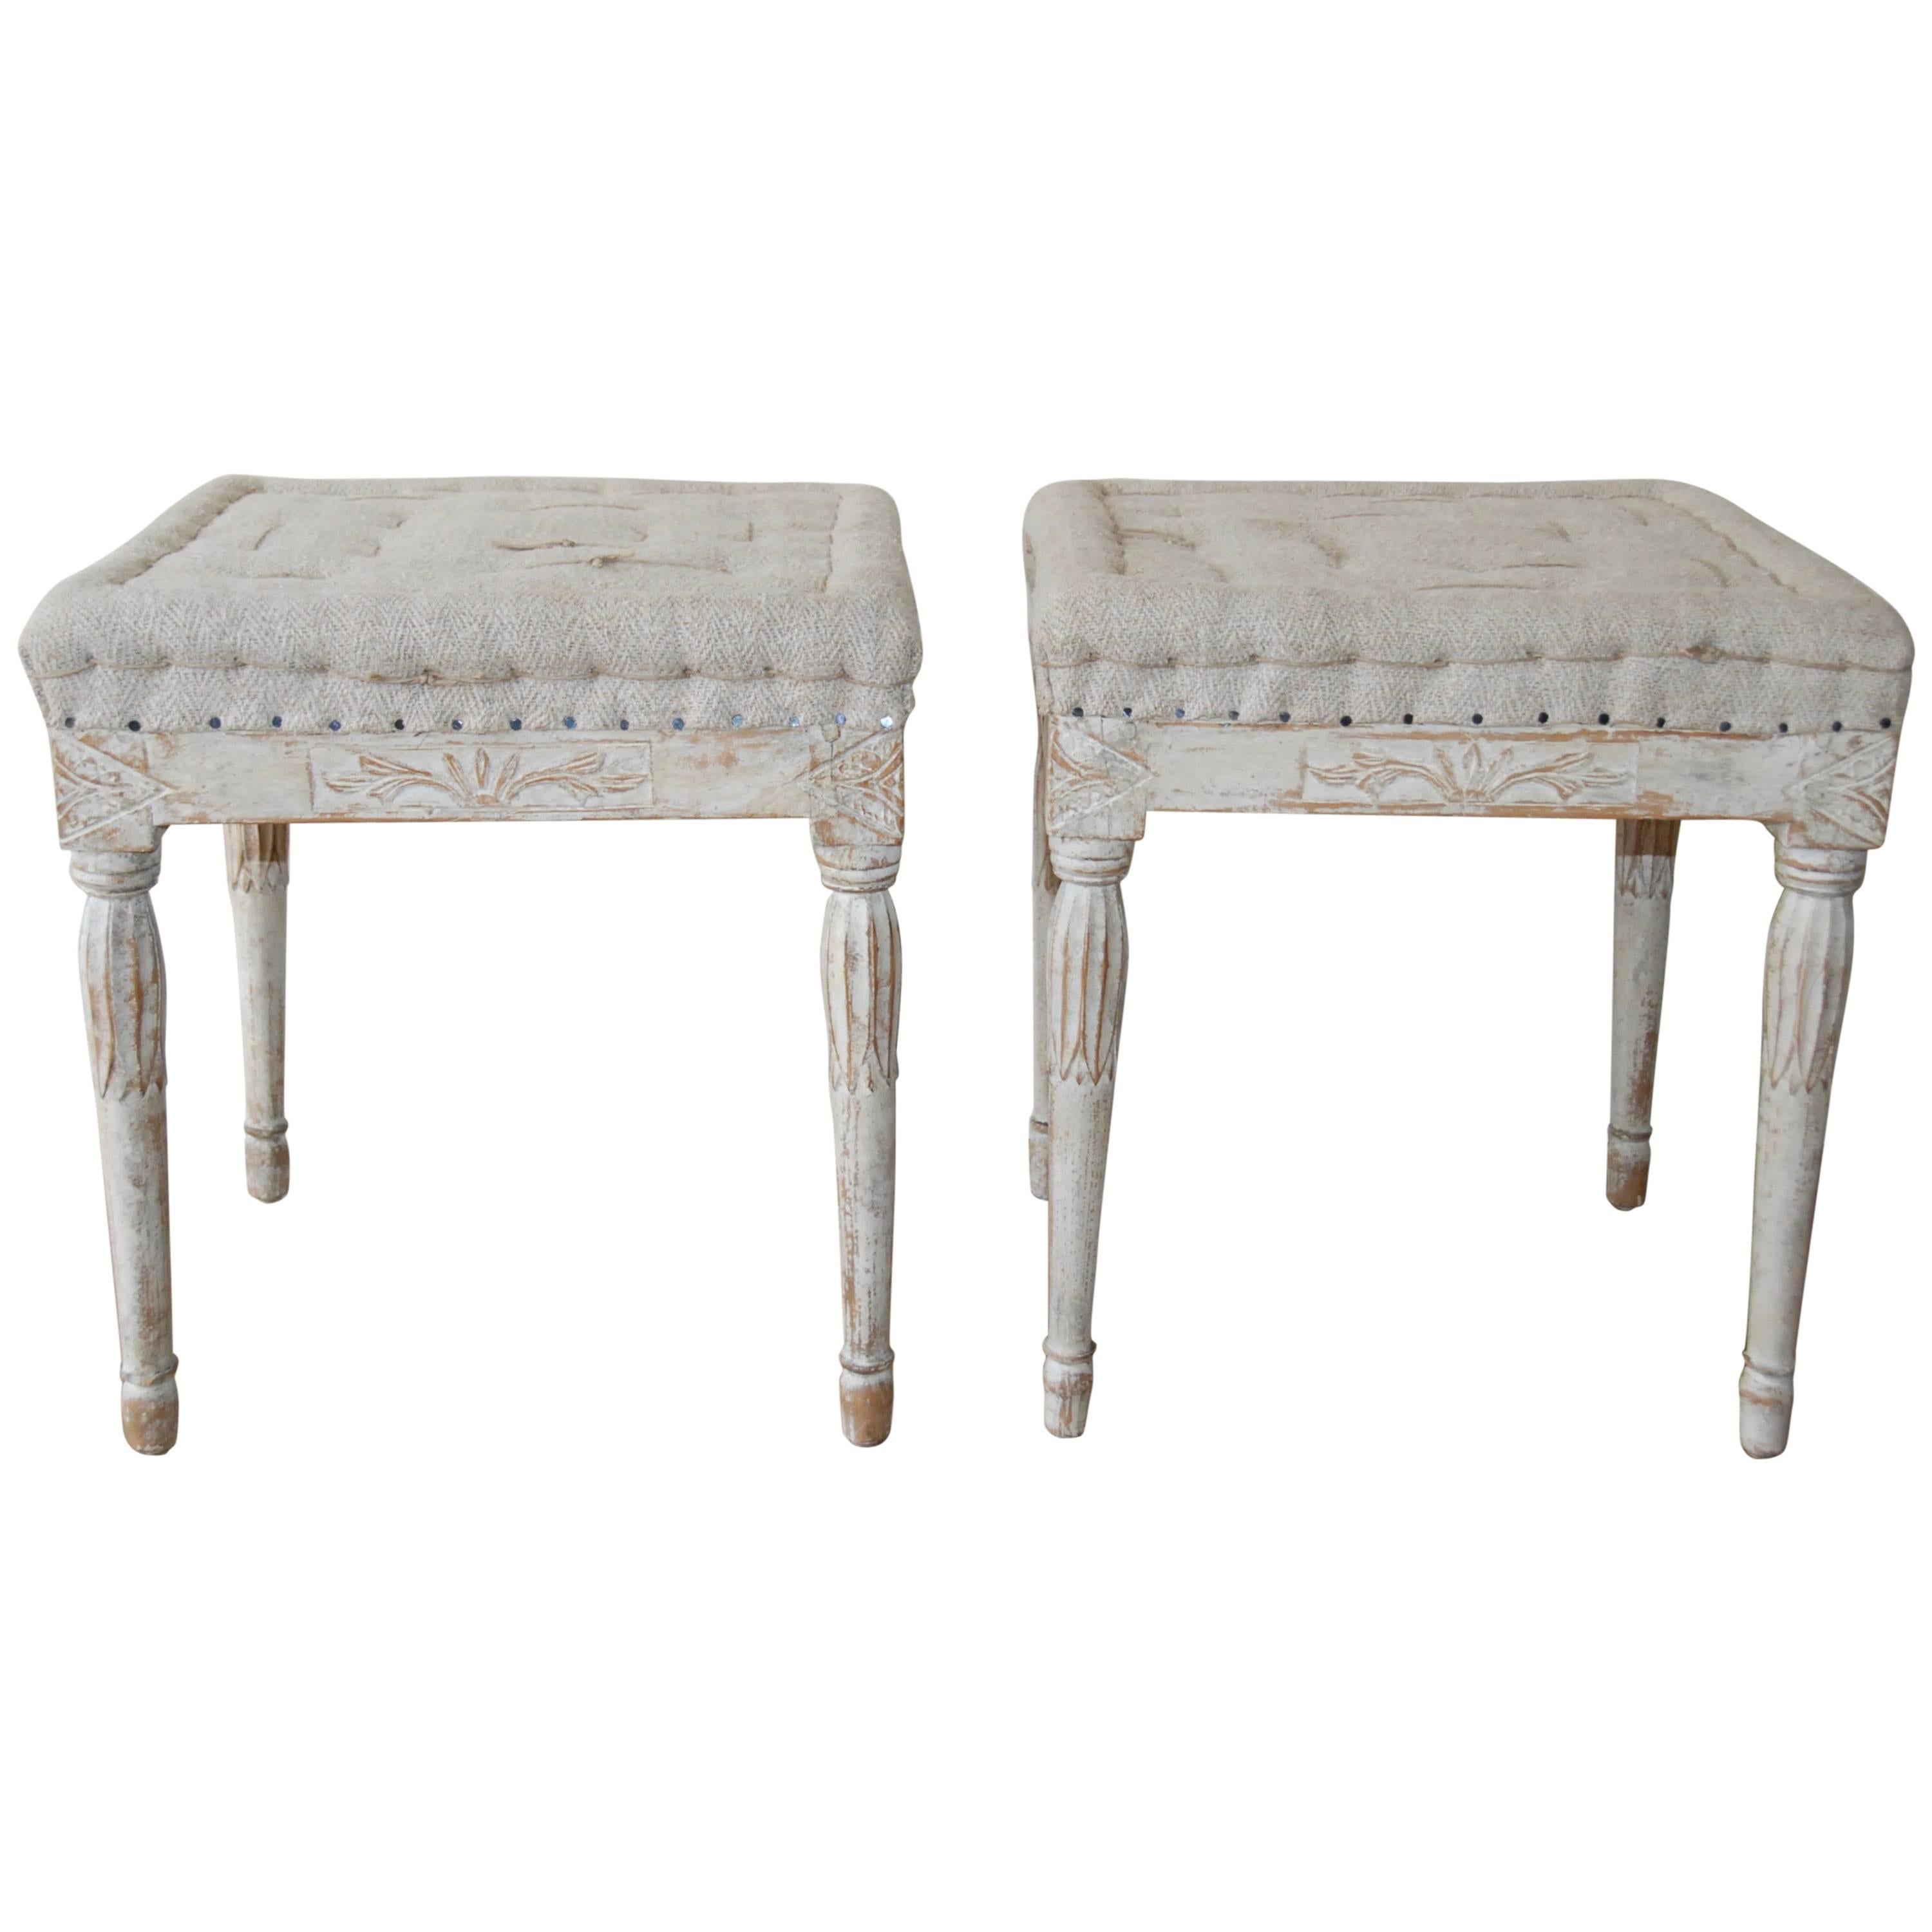 Signed Pair of Swedish Period Gustavian Stools For Sale